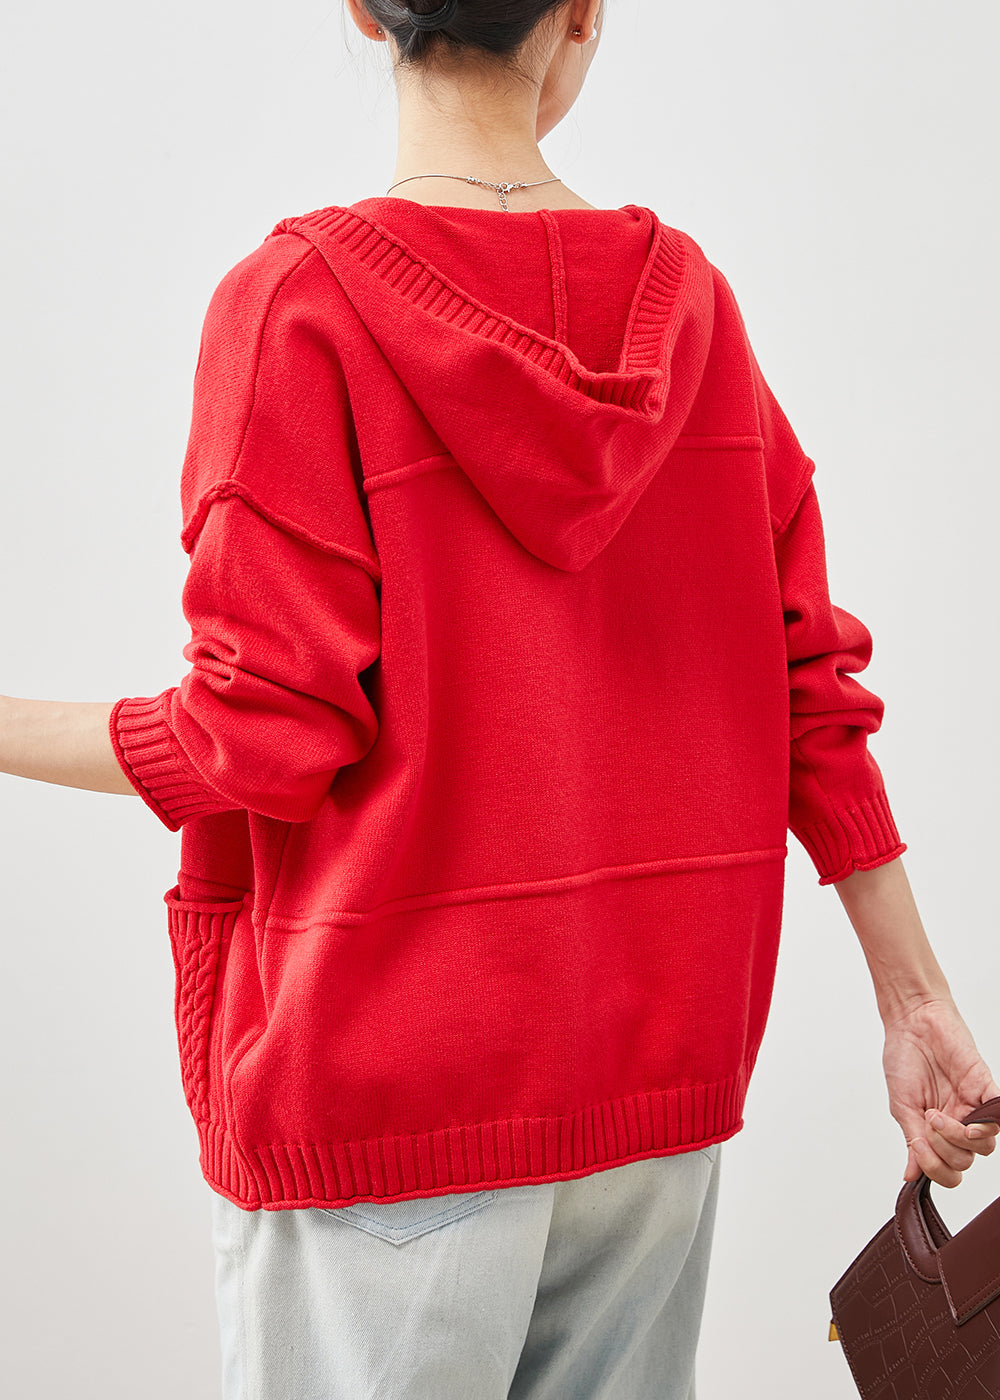 Stylish Red Hooded Pockets Knit Cardigans Spring